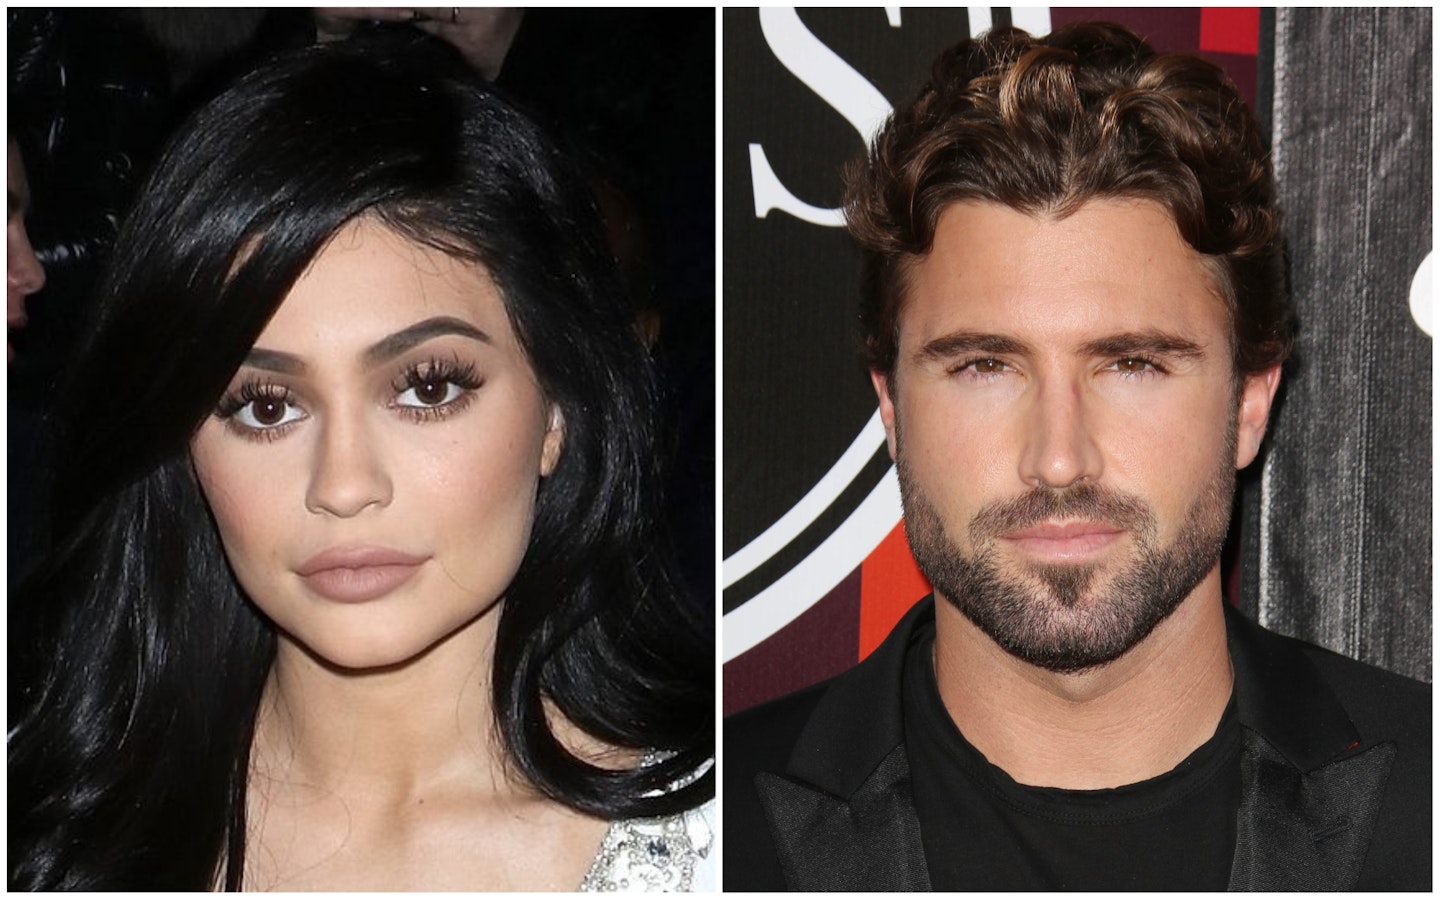 Kylie and Brody Jenner